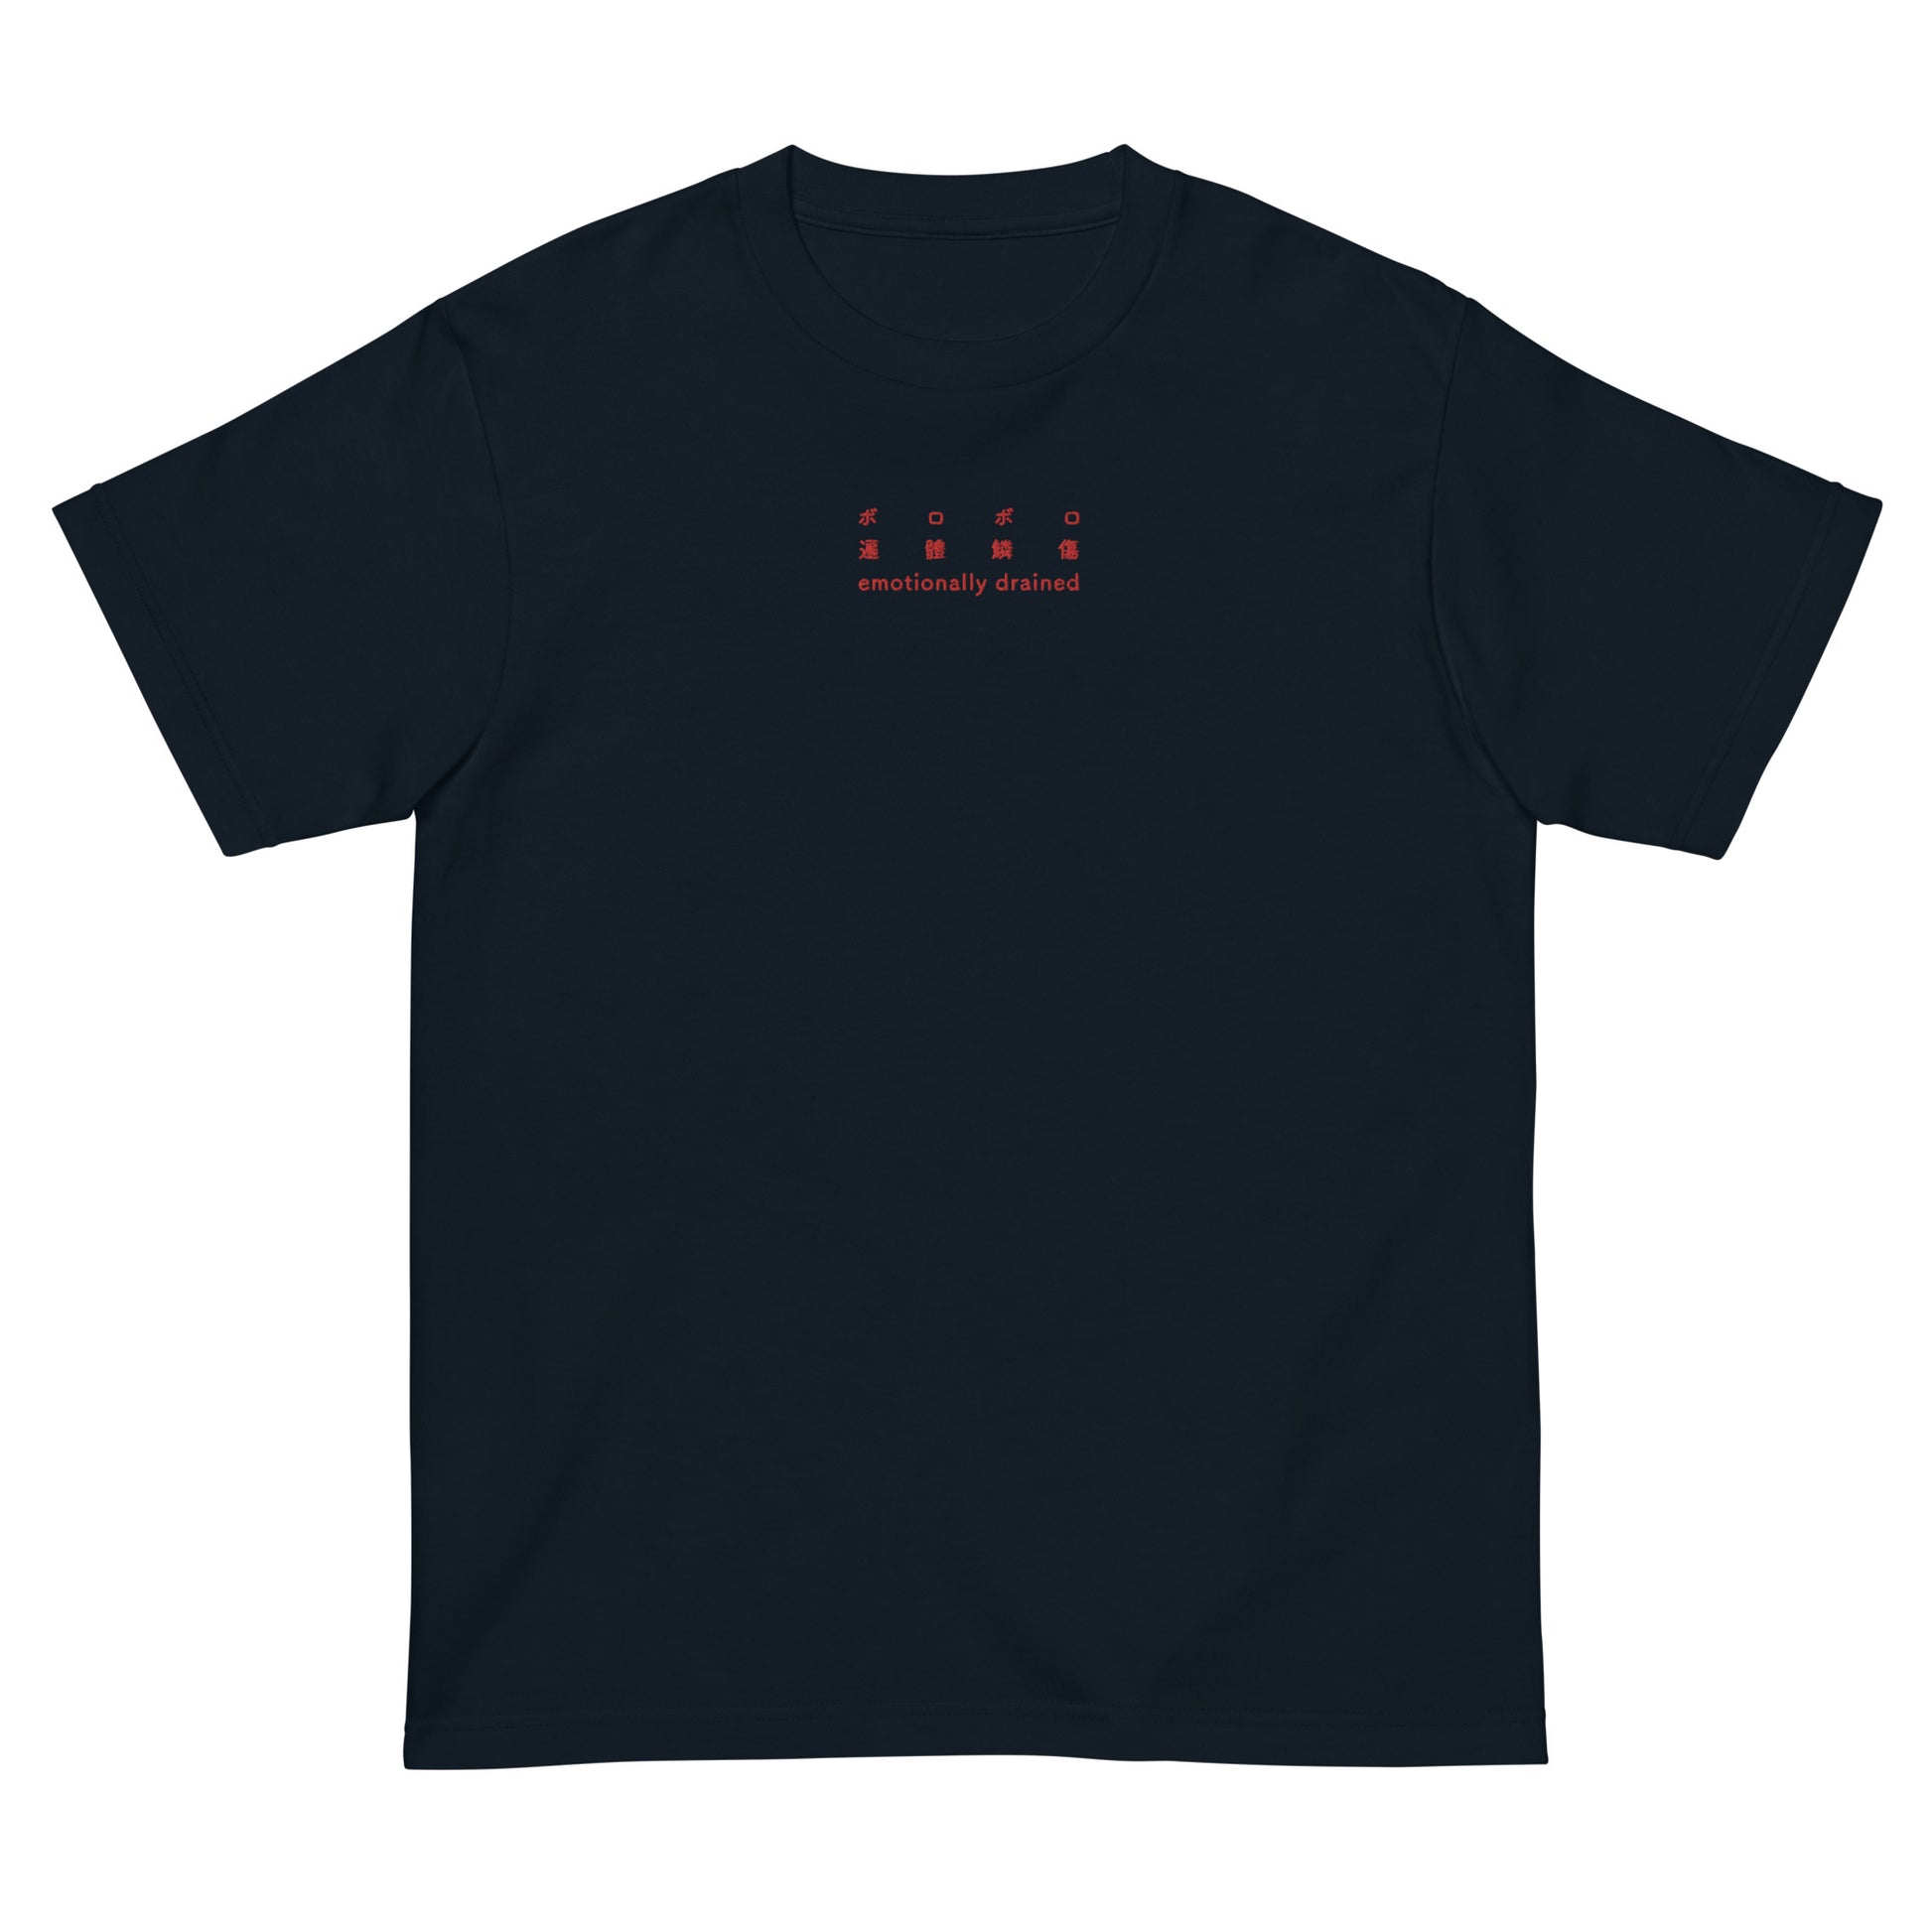 Navy High Quality Tee - Front Design with an Red Embroidery "emotionally drained" in three languages